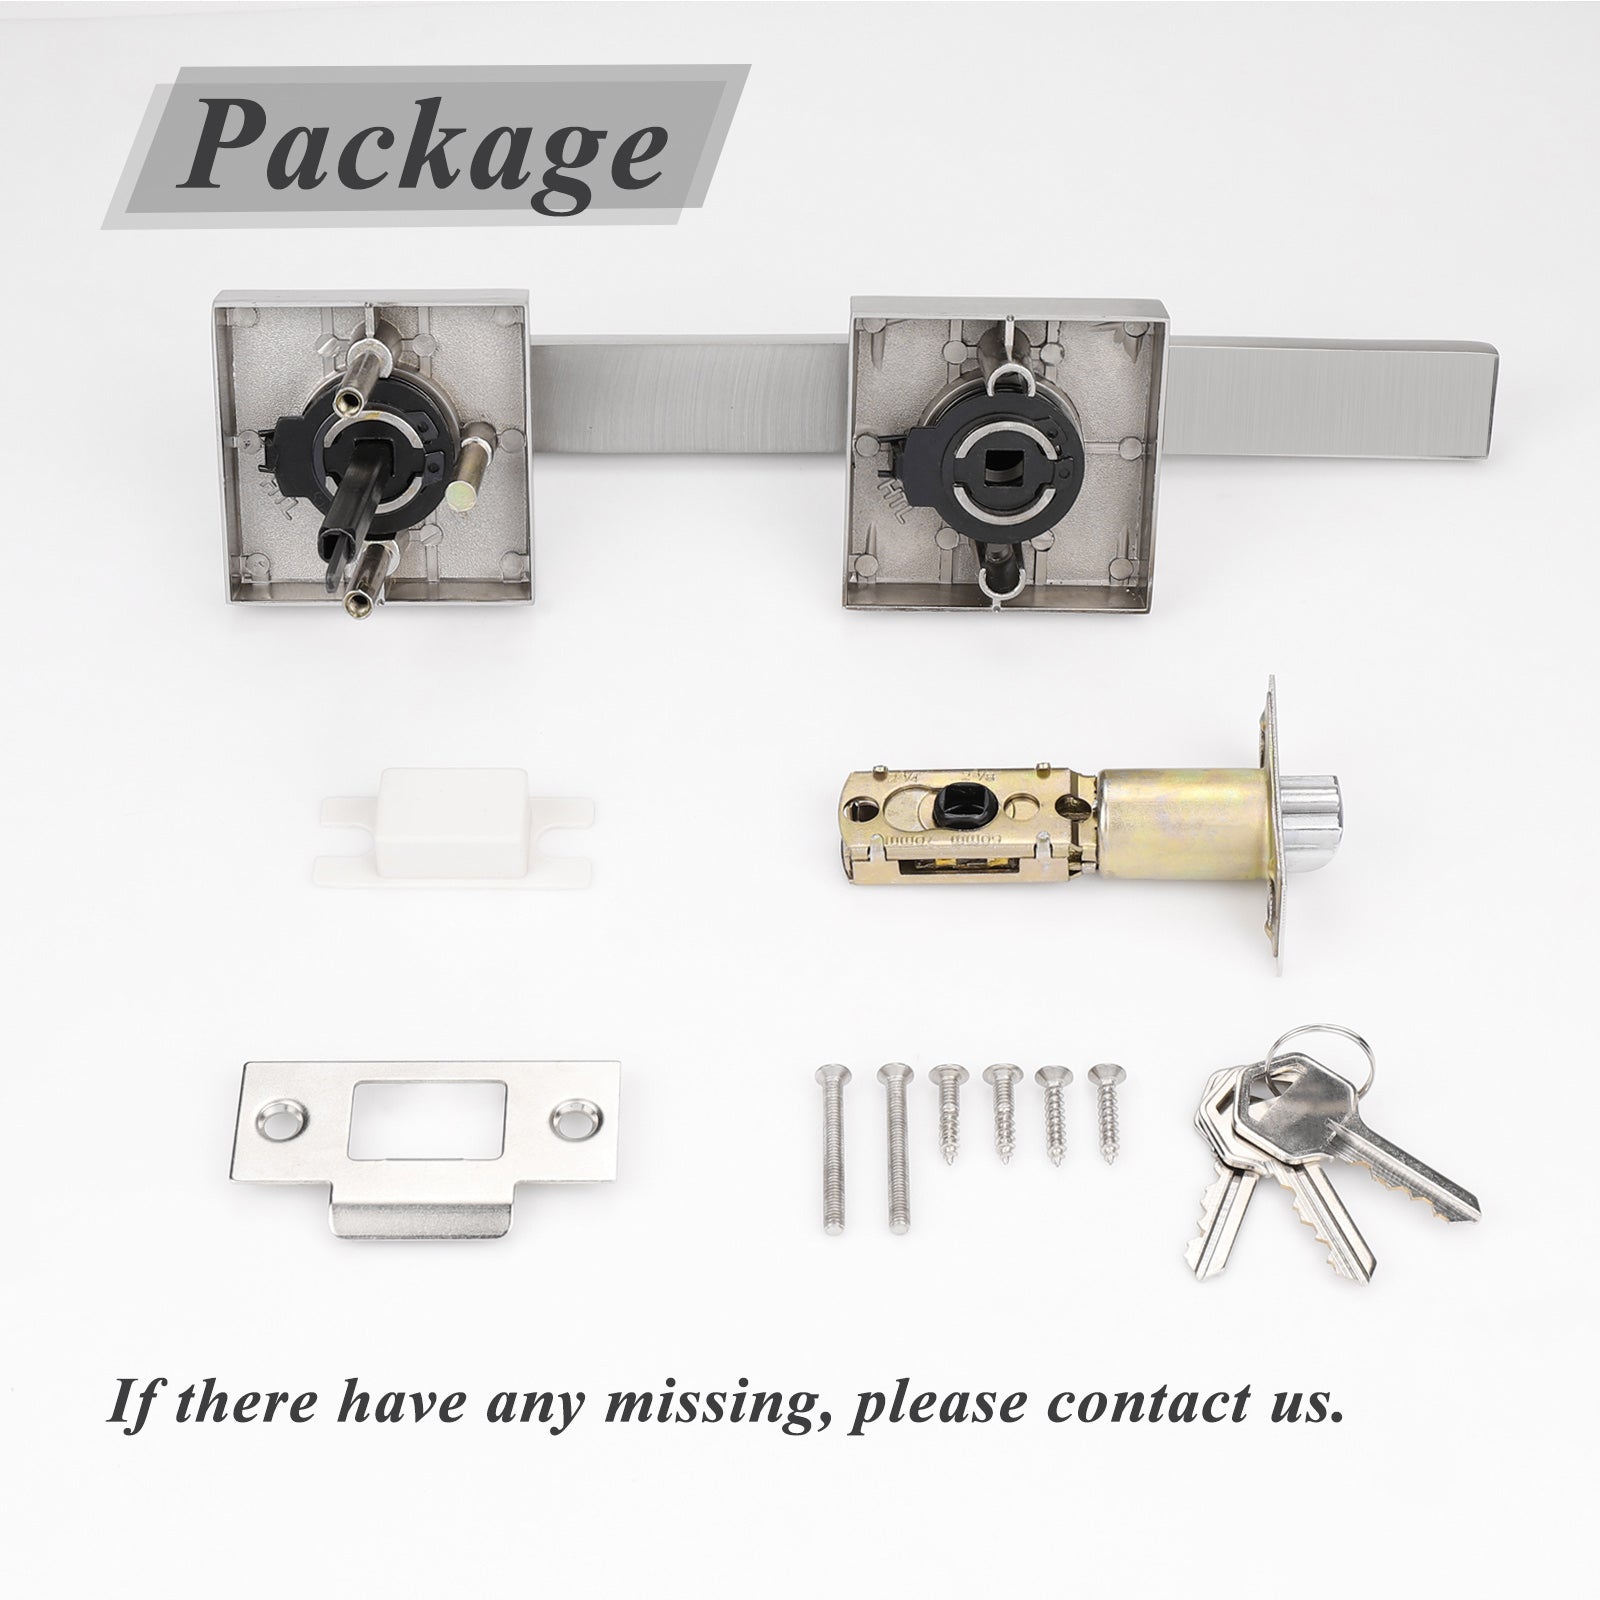 Heavy Duty Door Handles Brushed Nickel Finish, Entry Keyed Lock/ Privacy/Passage/Dummy Function, DL01SN